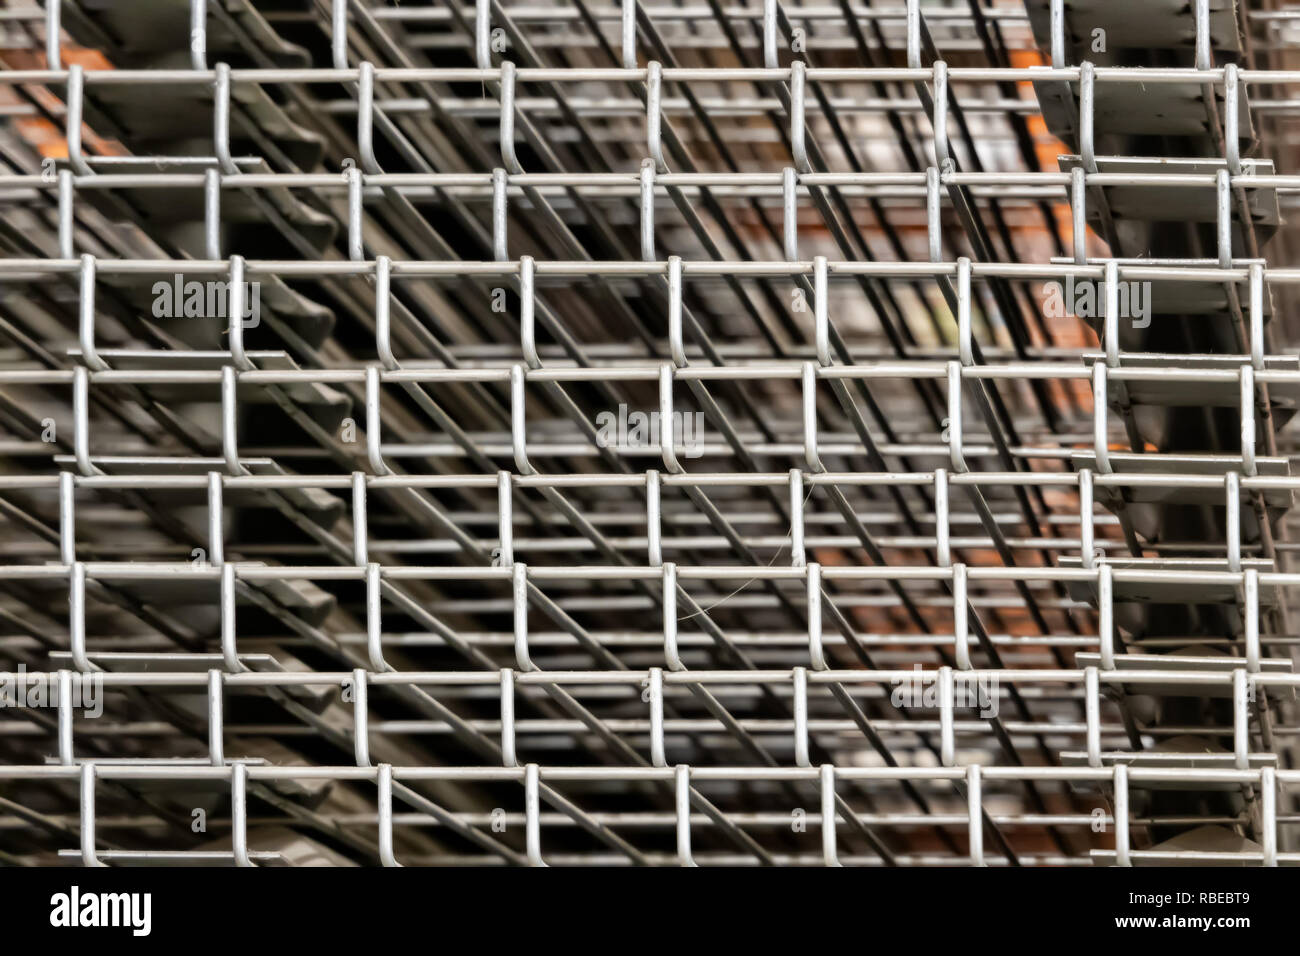 construction material - stainless steel metal mesh Stock Photo